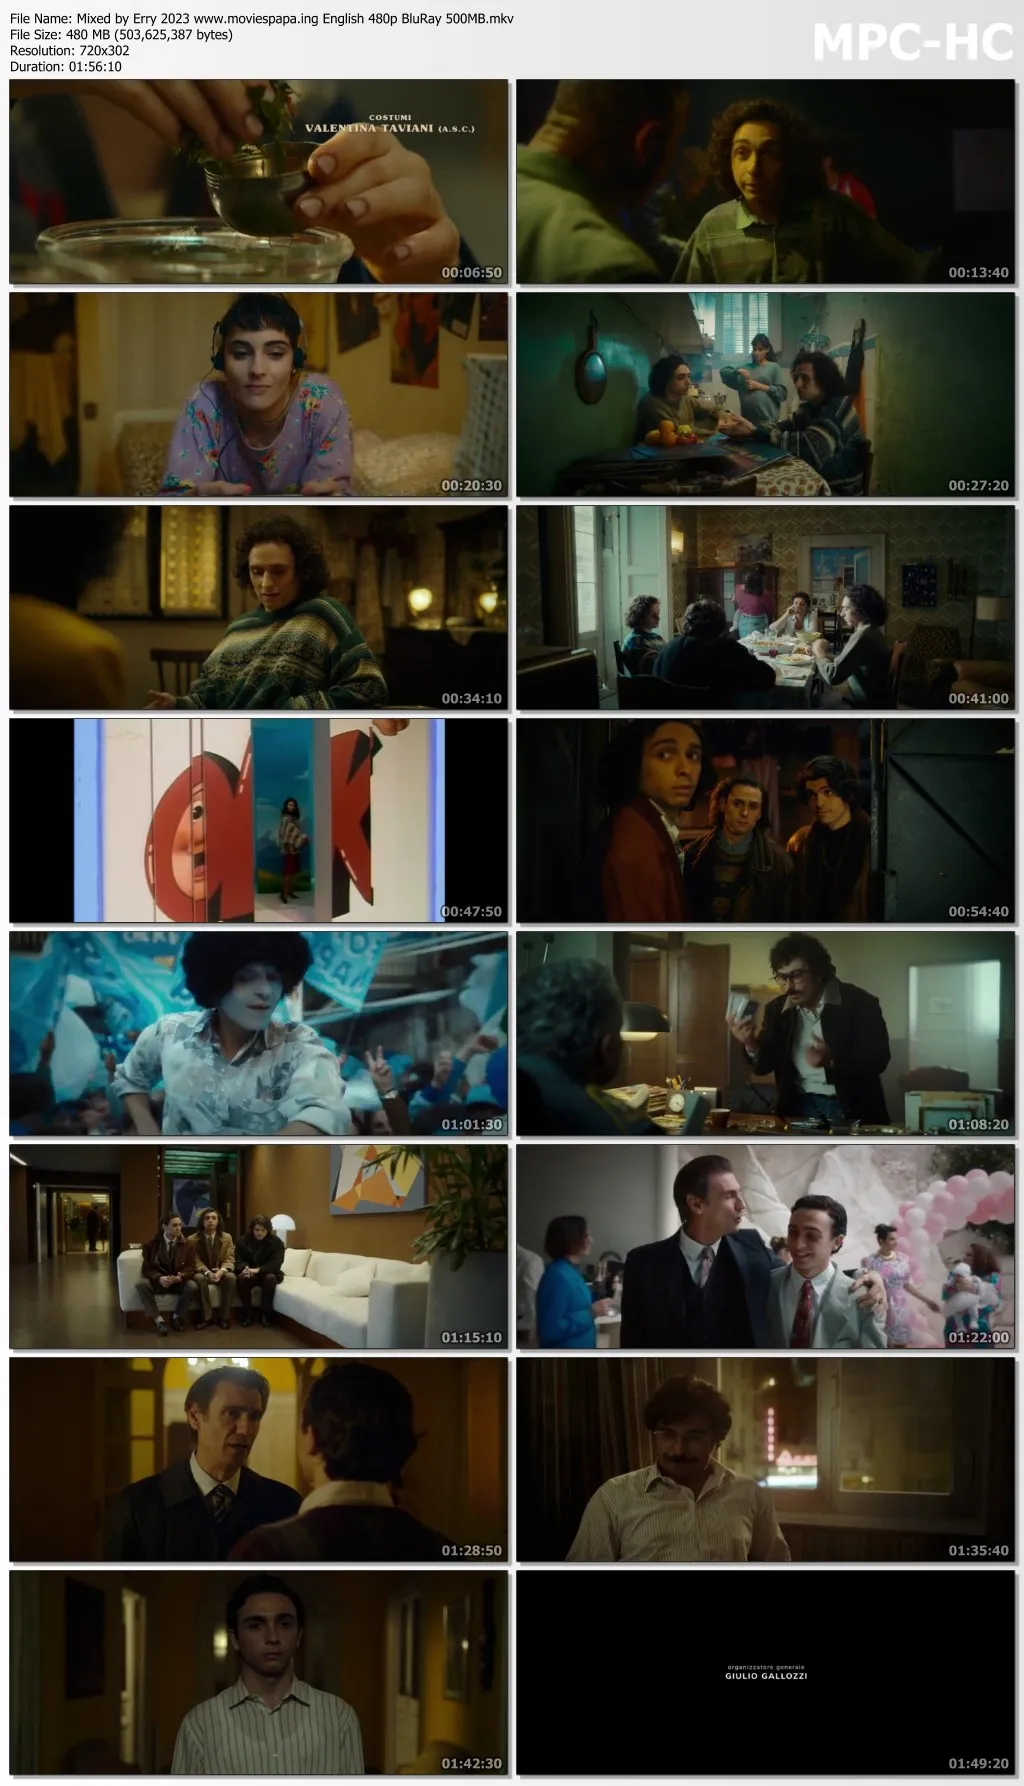 Mixed by Erry 2023 English 480p BluRay 500MB Download